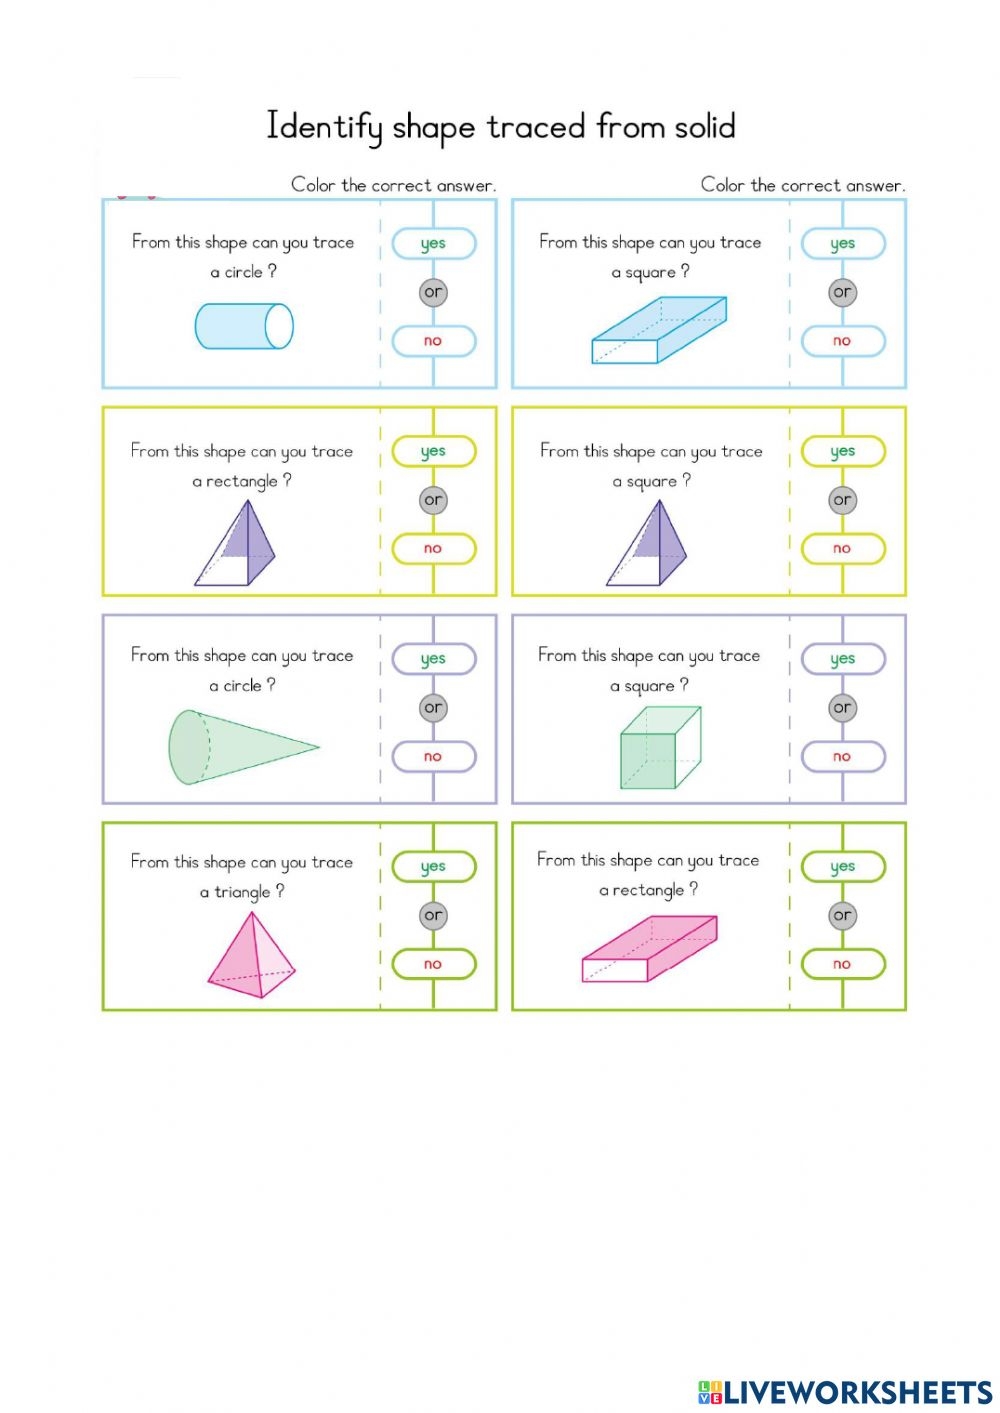 identifying-flat-shapes-by-tracing-solid-shapes-worksheet-math-worksheet-answers